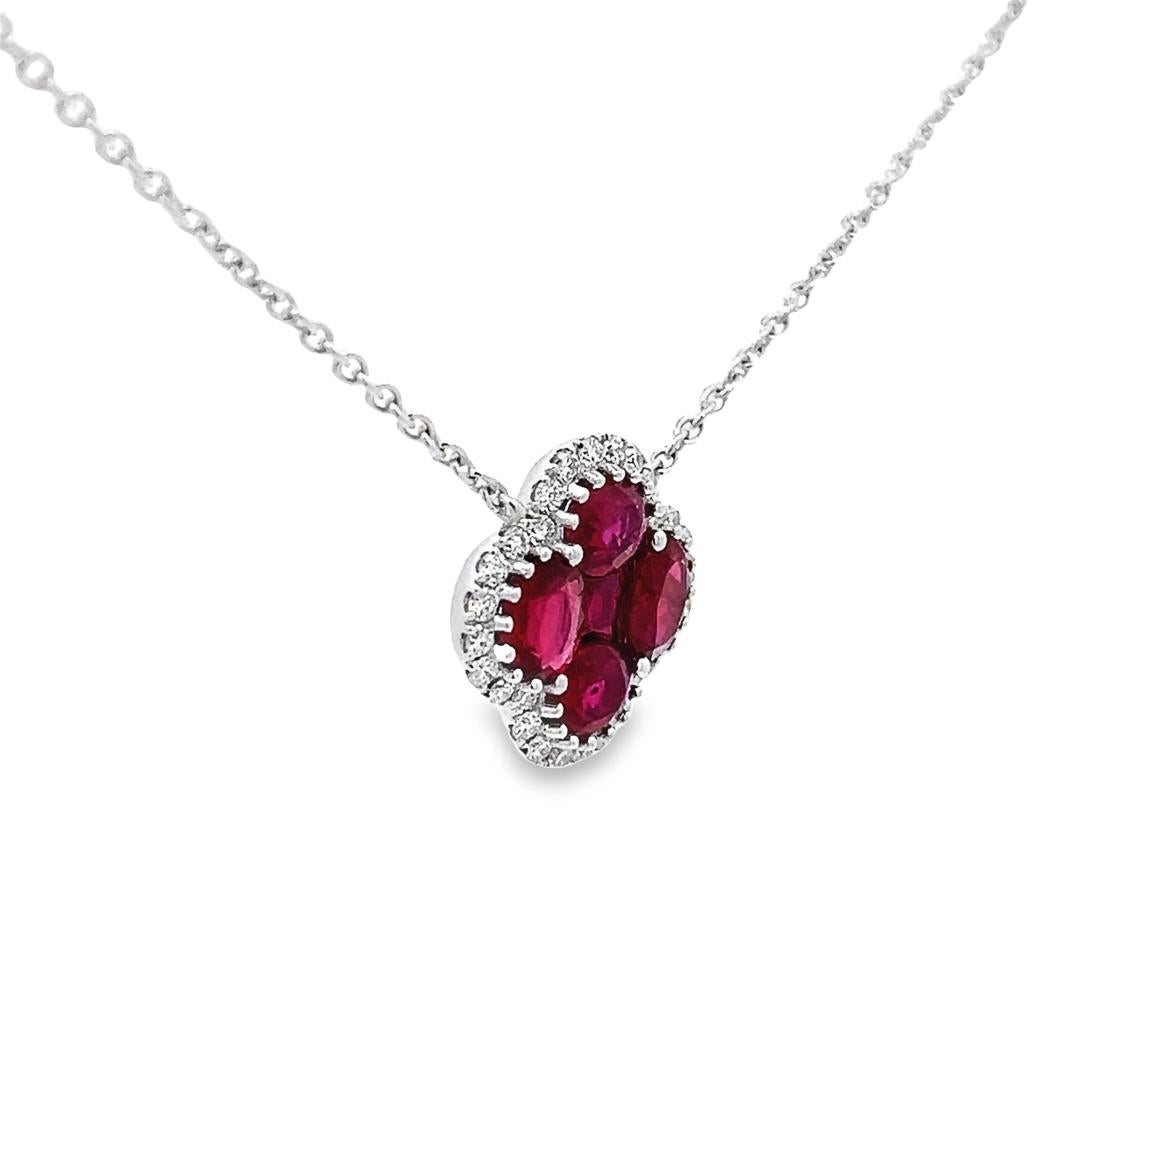 Looking for a unique and unforgettable gift? Look no further! This exquisite Ruby flower, accented with a small Diamond Oval& Princess Cut  Shaped, is set in 18k white gold with an adjustable sizing lock and is perfect for any special occasion.